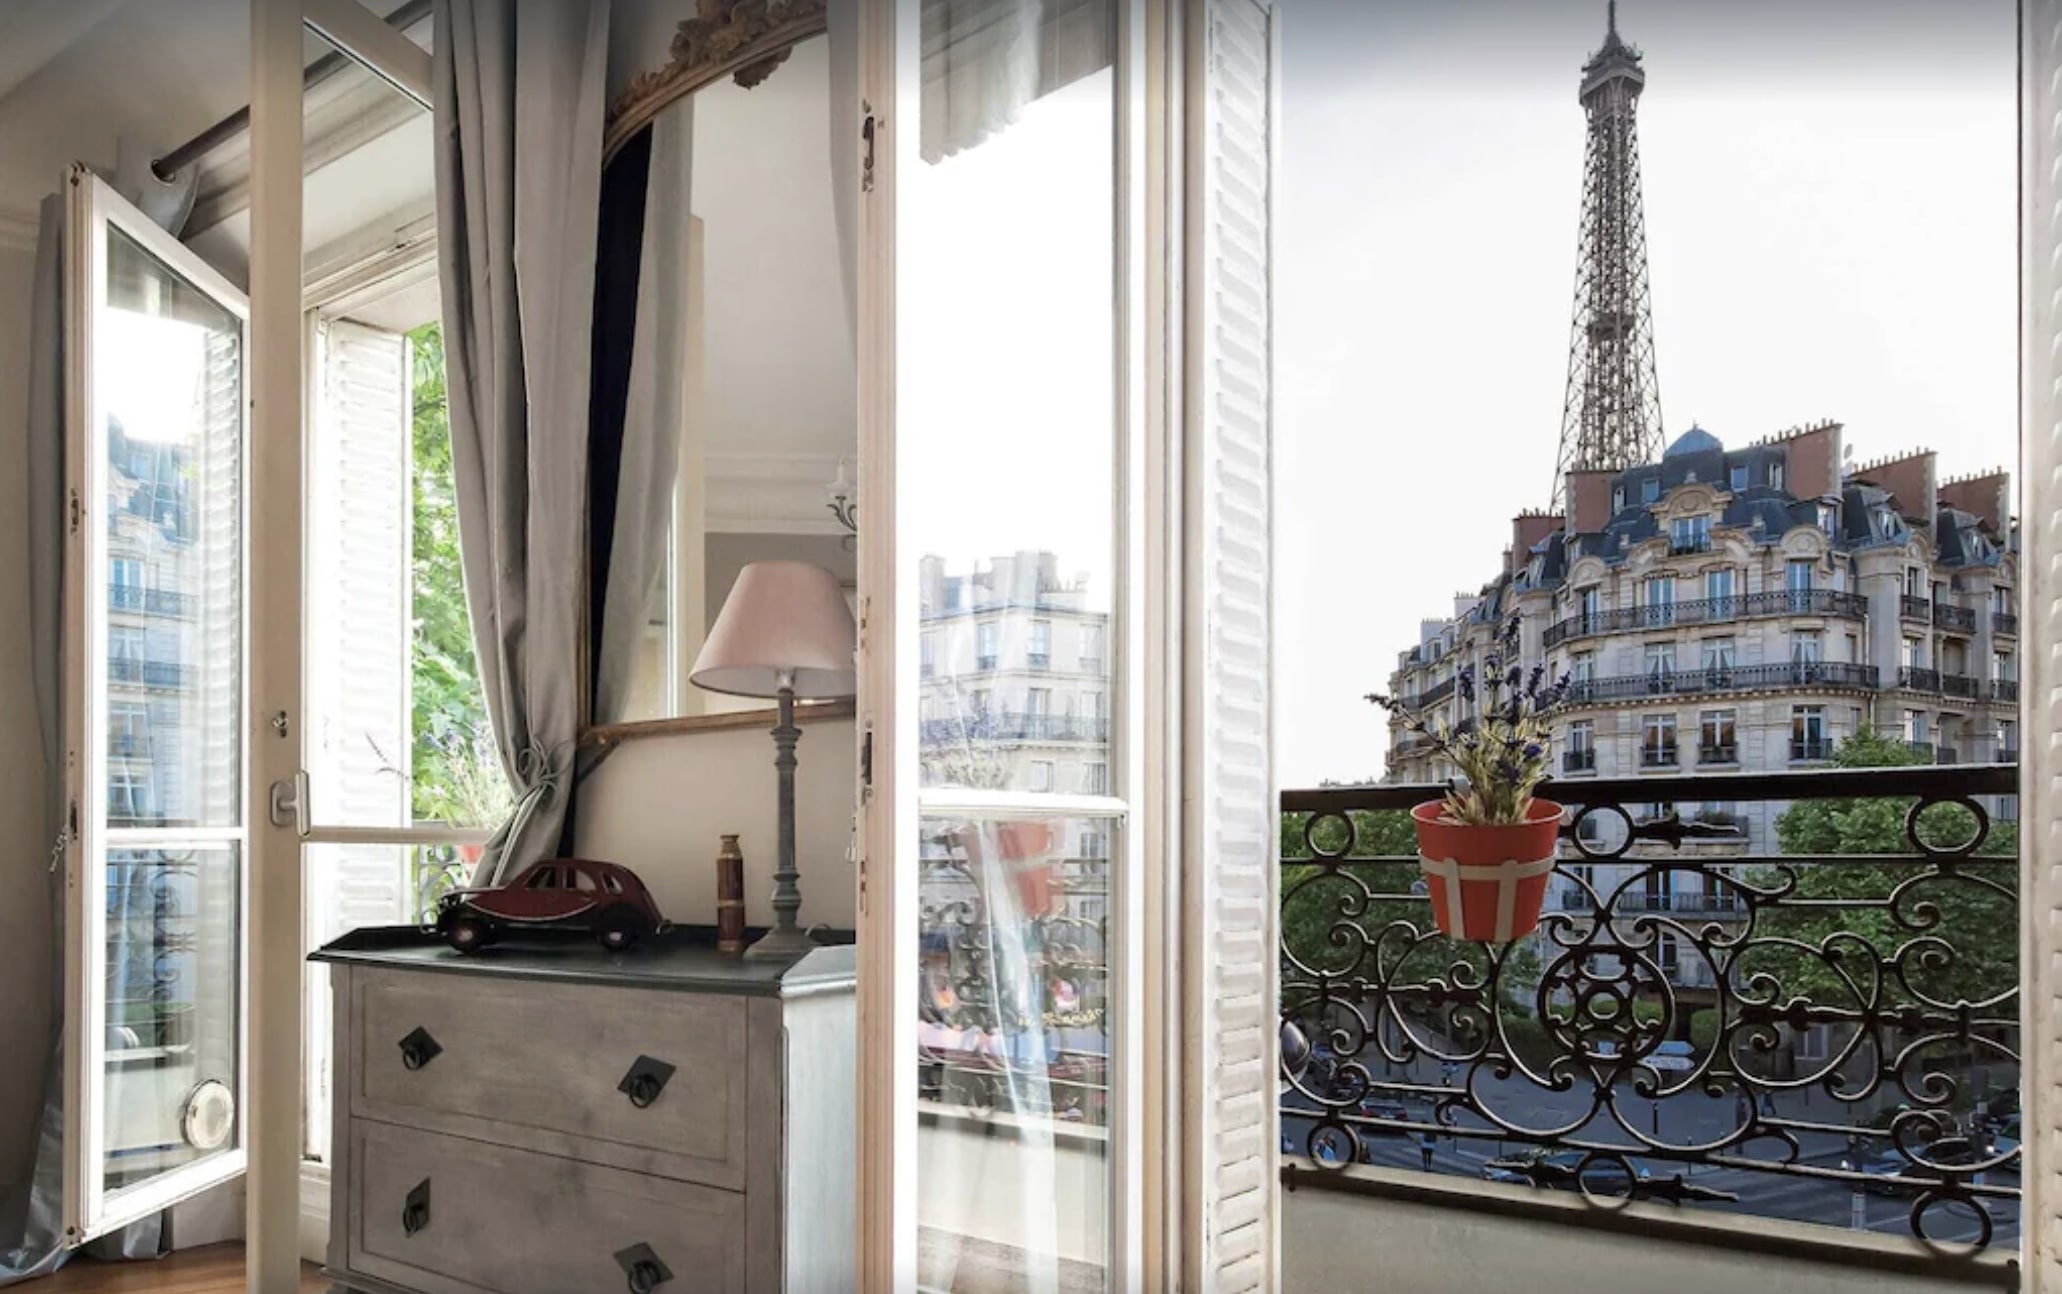 Paris hotels with Eiffel tower views